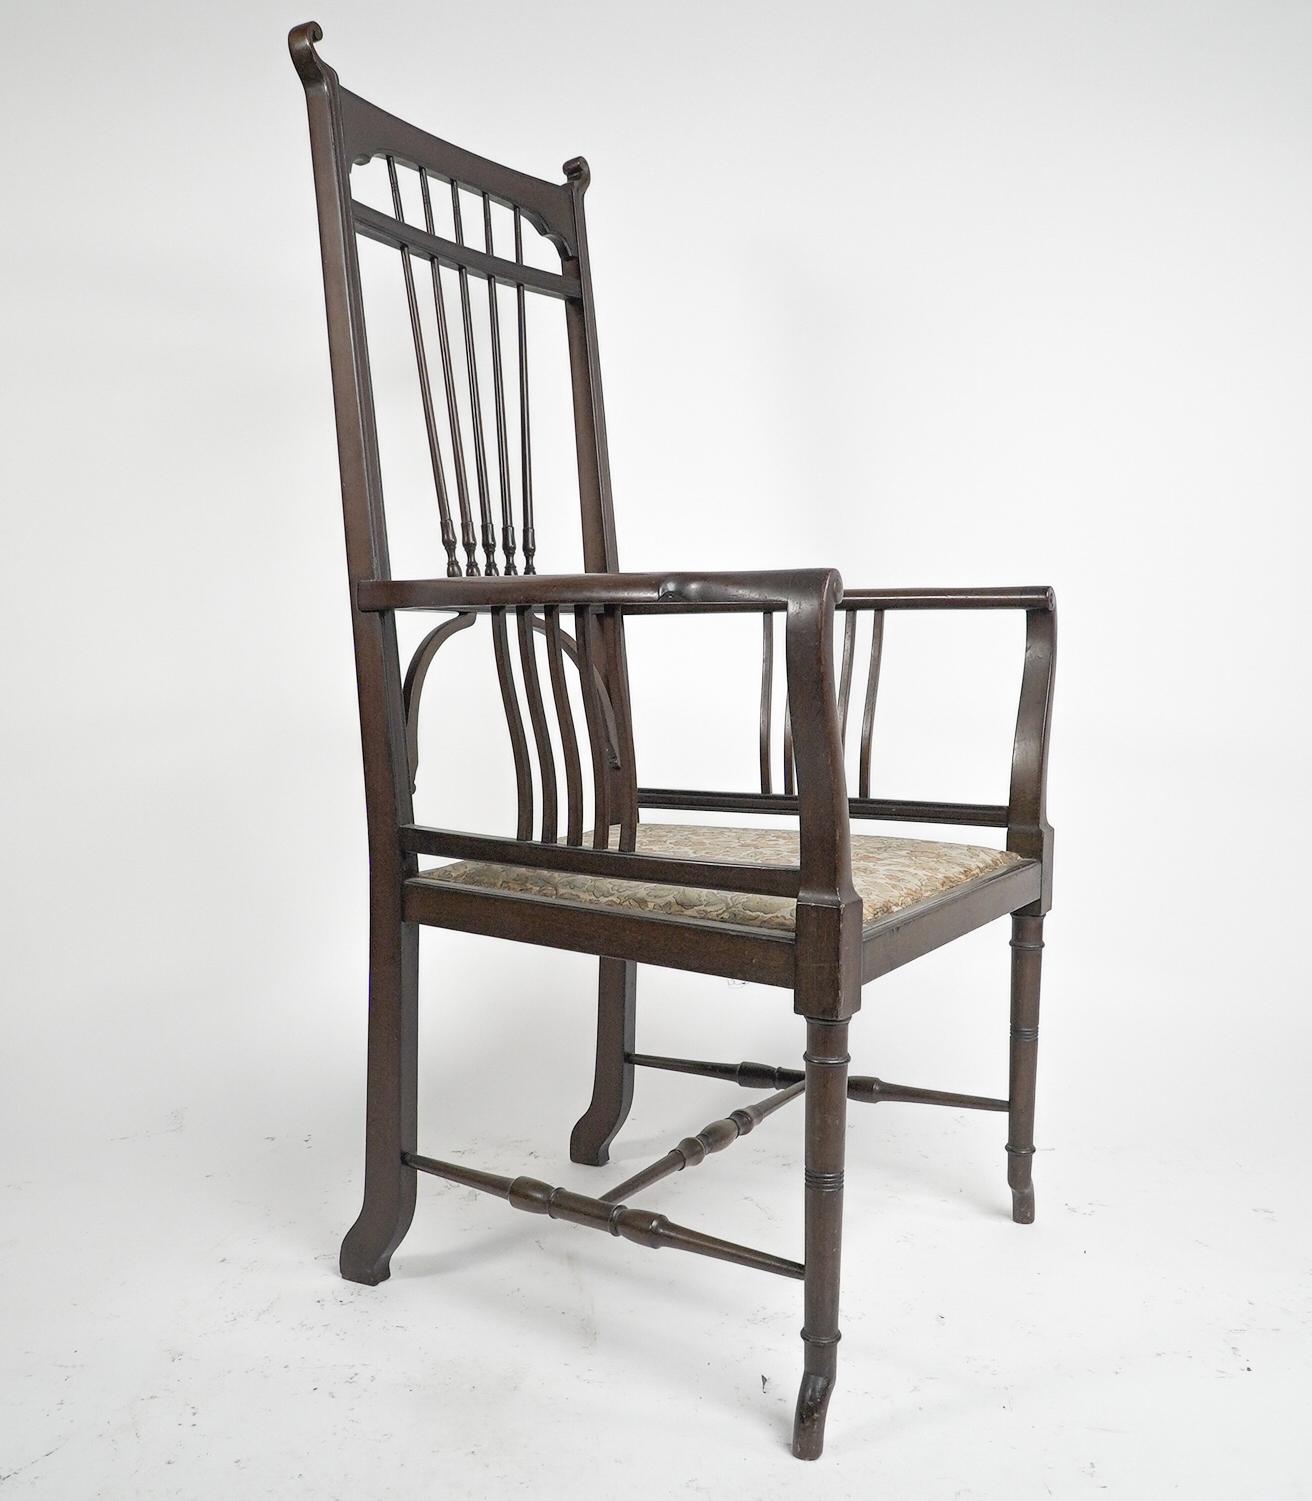 Henry Batley Attributed. An Aesthetic Movement walnut armchair with sinuous touches, curled finials, and a spray of elongated turned details to the back. The shaped arms have curvaceous supports below them uniting the seat, with fine ring turned